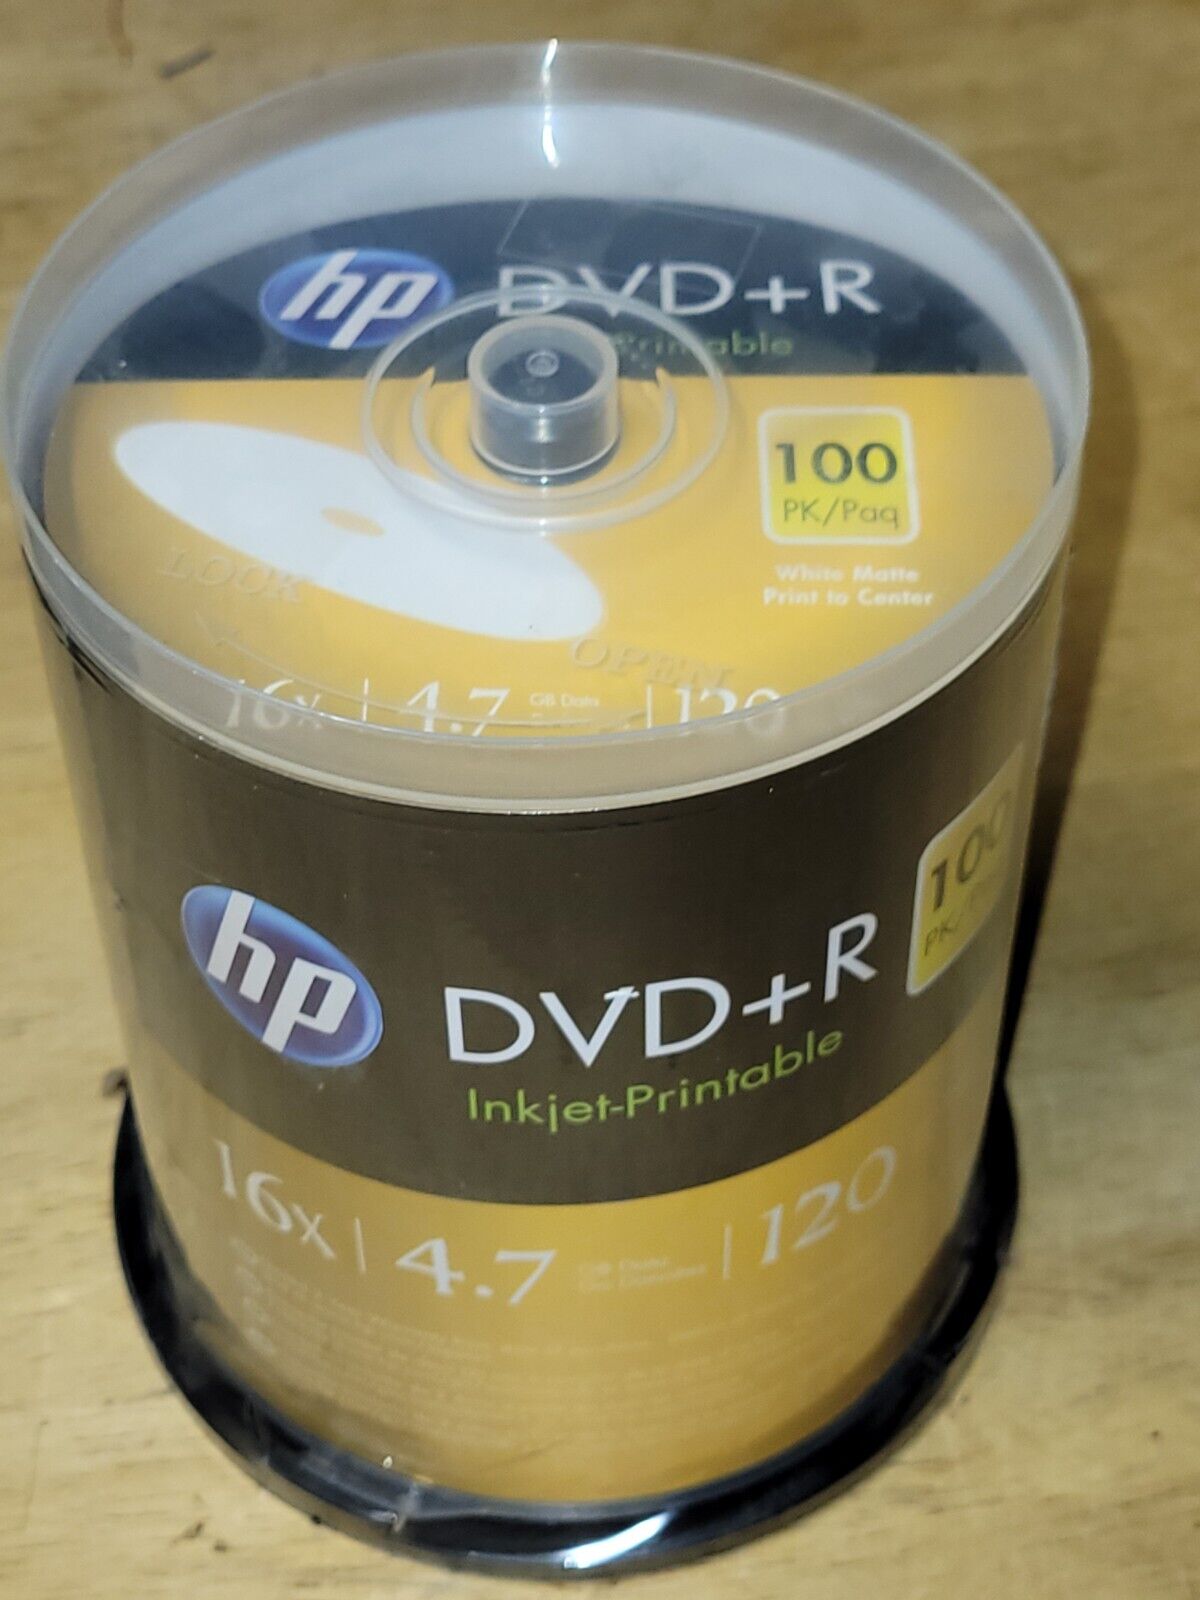 HP DVD +R 4.7 GB 120 MIN 16X 100 Pack spindle case New Sealed DVD+R